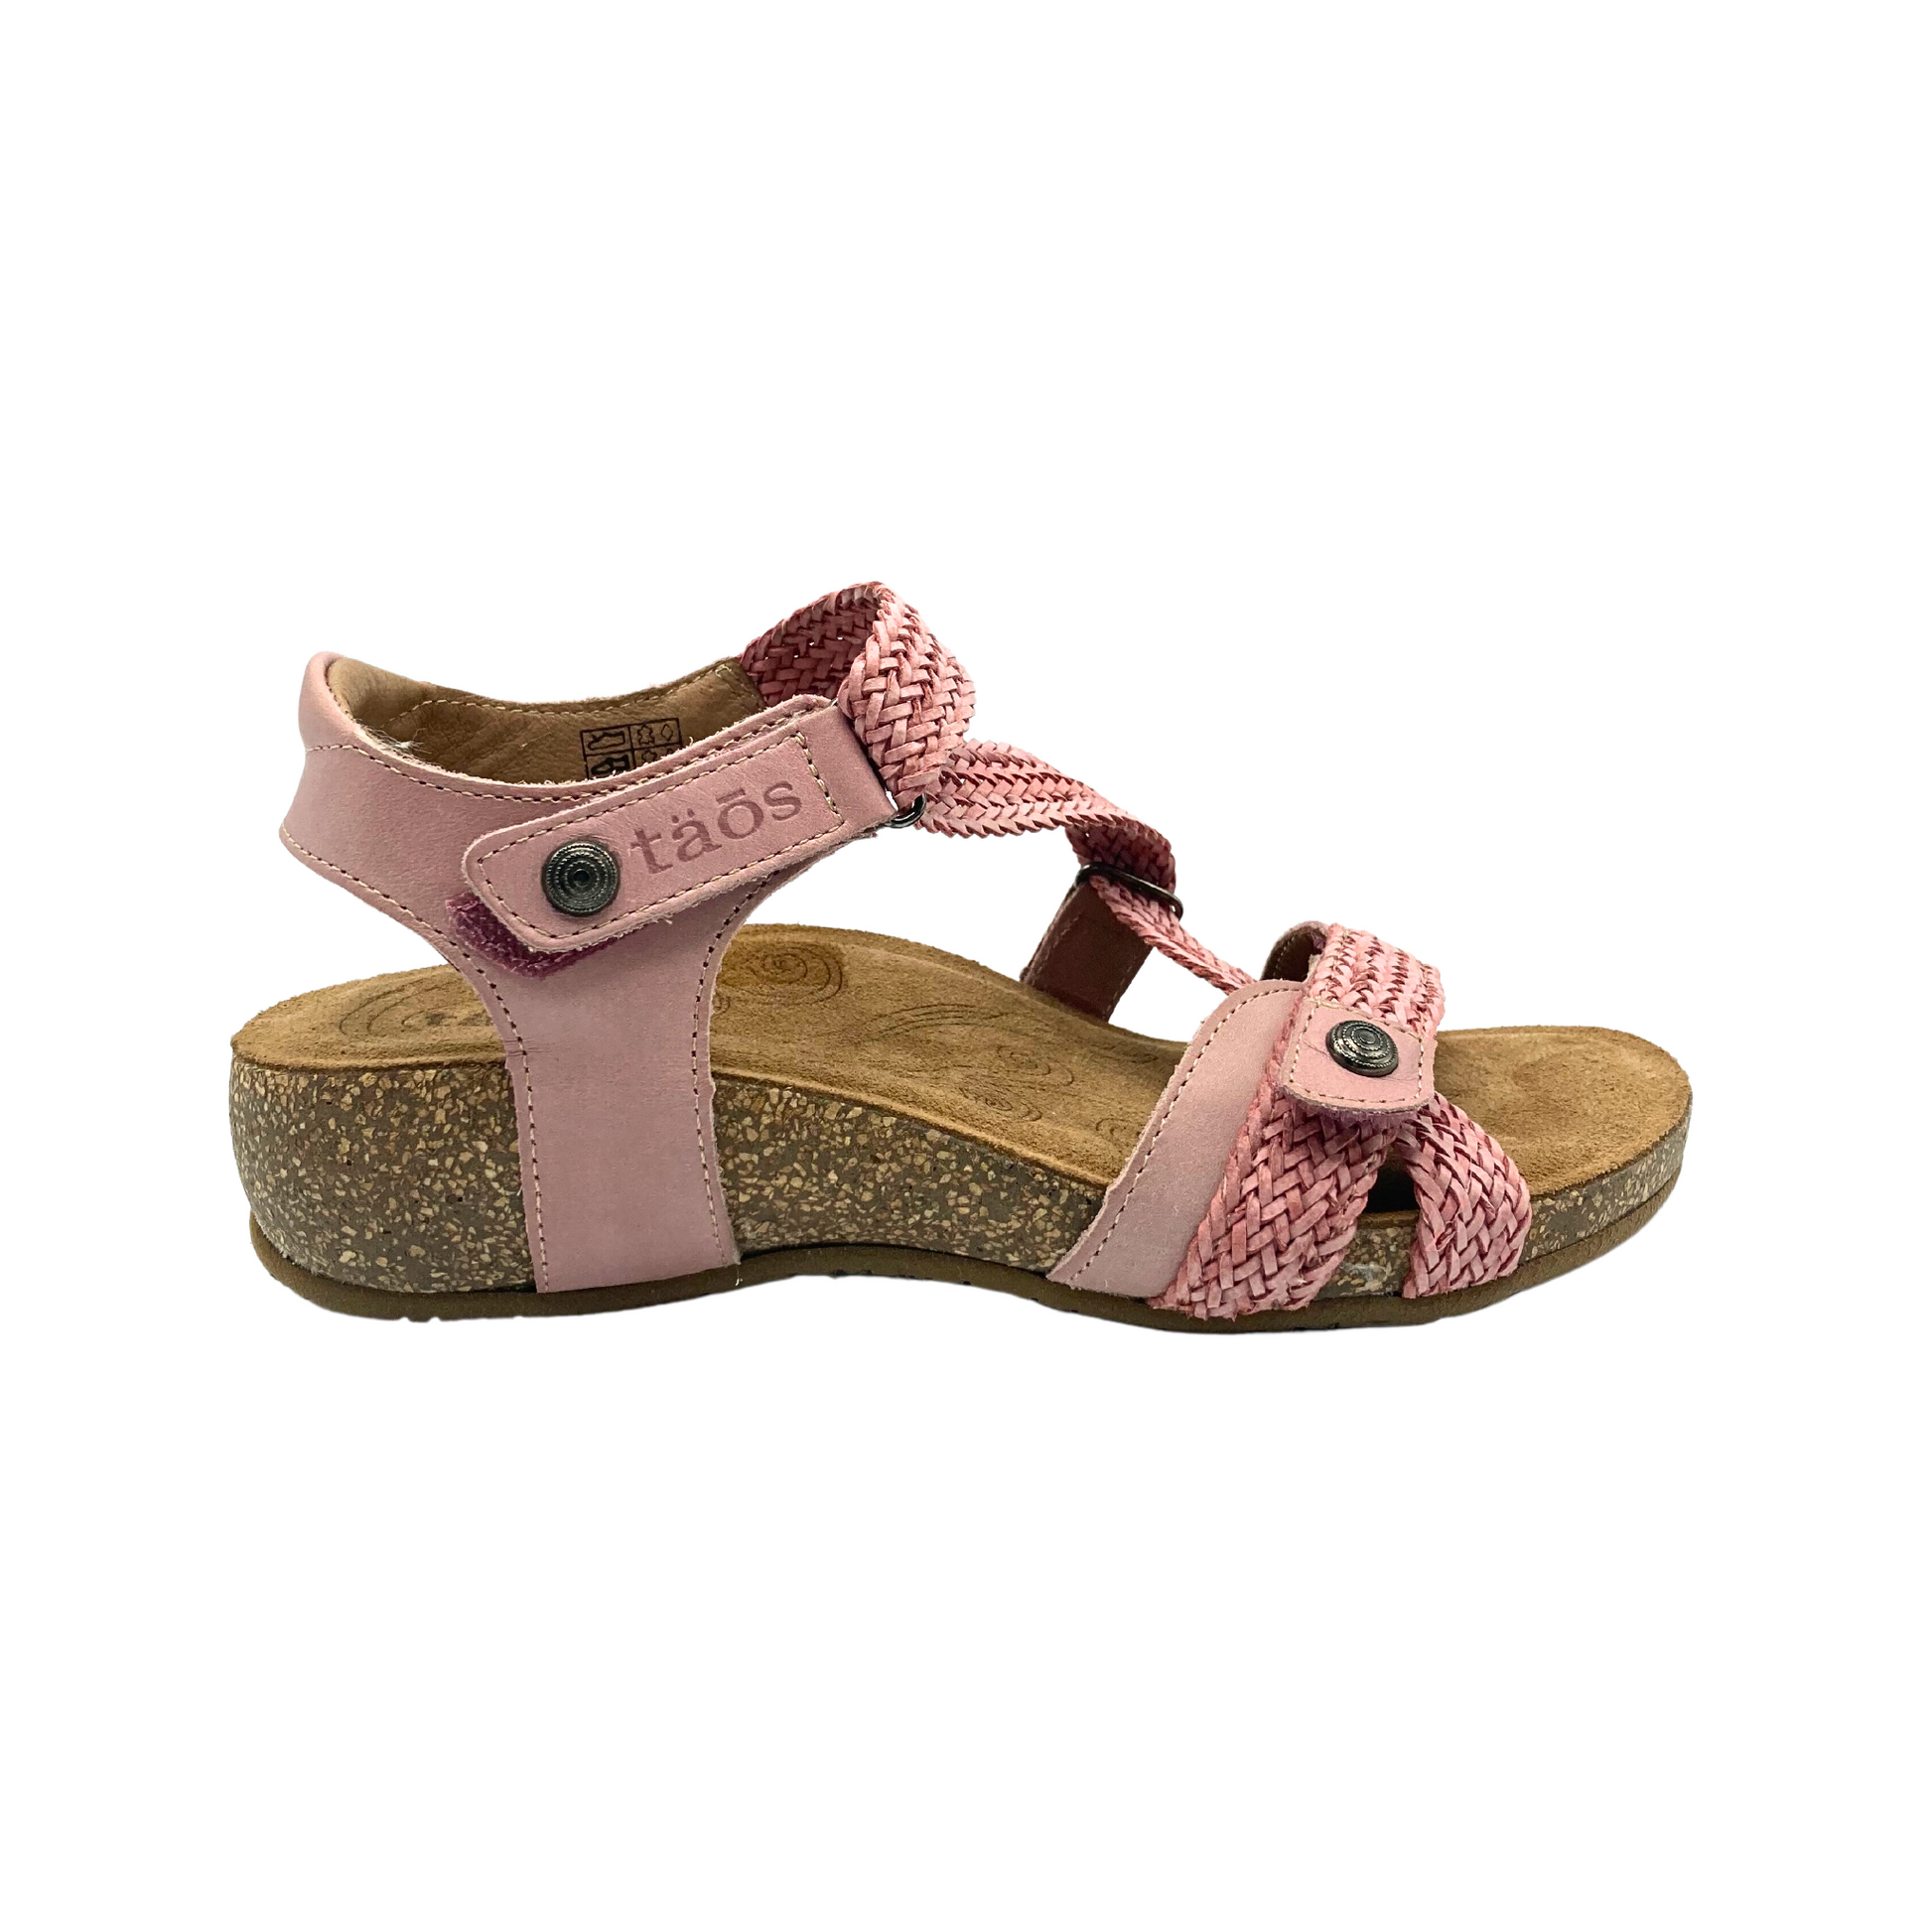 Outside view of right shoe.  Taos Trulie offers adjustable straps at forefoot and ankle.